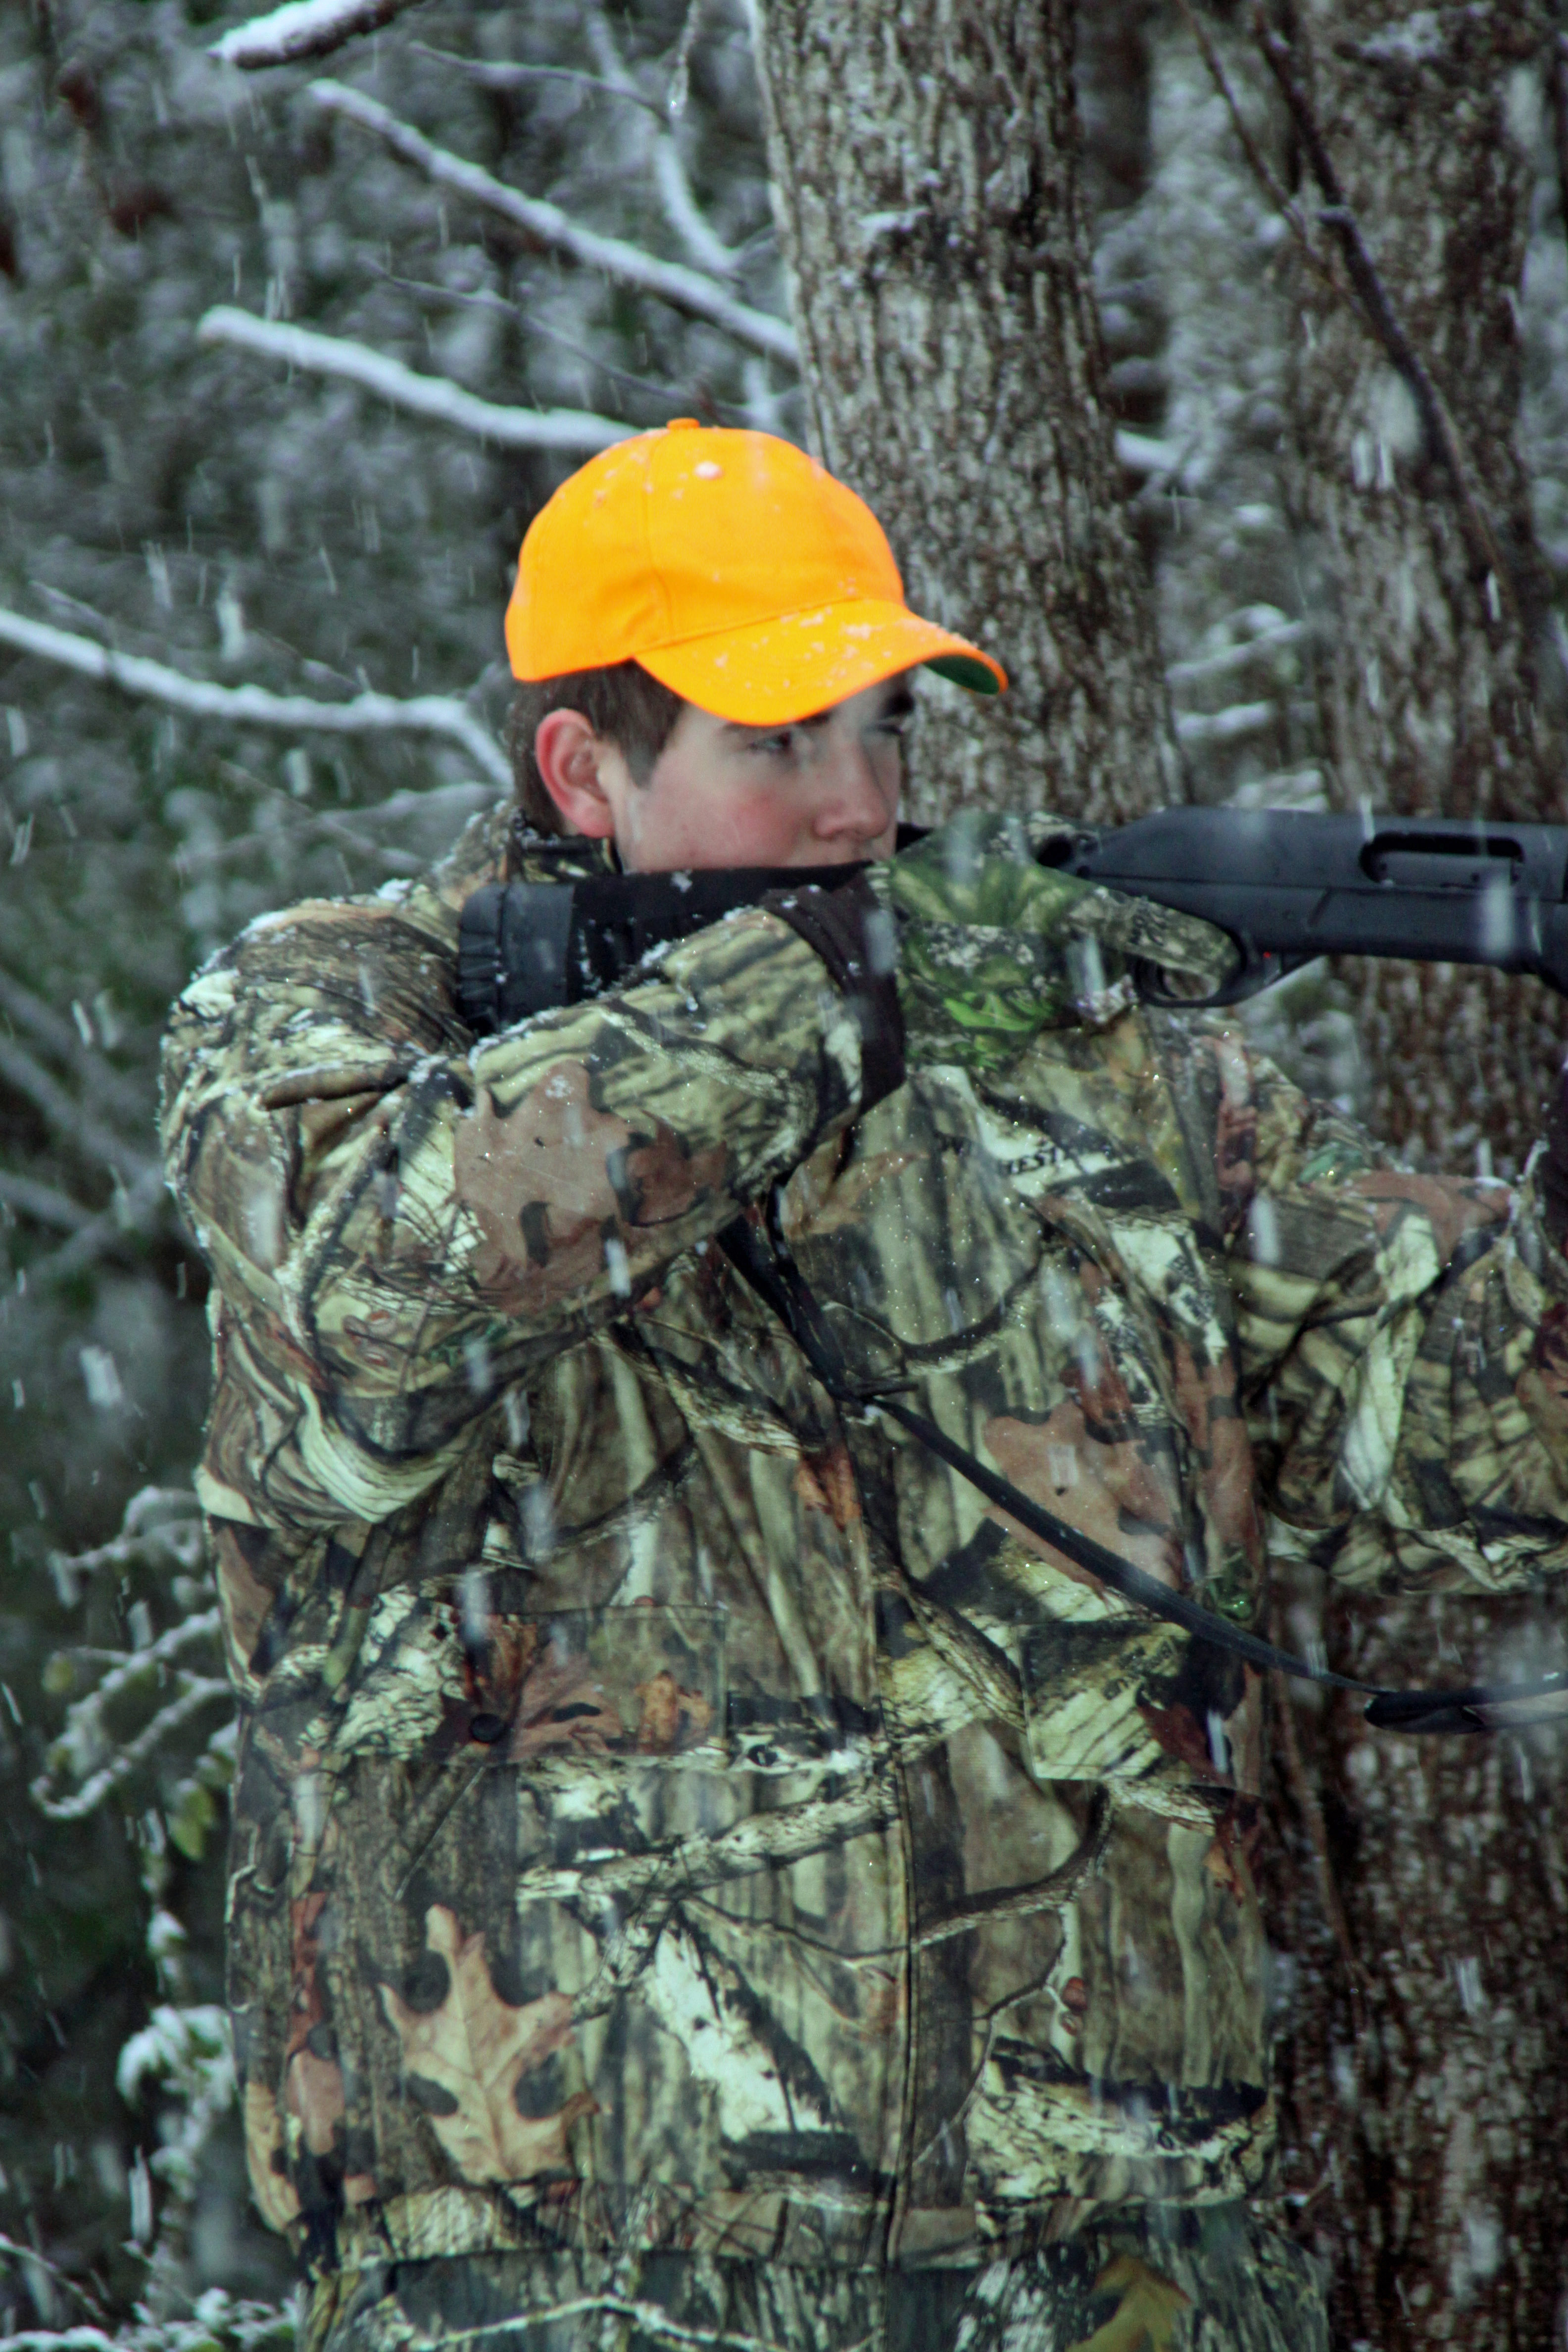 Avoid crowds and watch the weather to have success deer hunting late in the season.